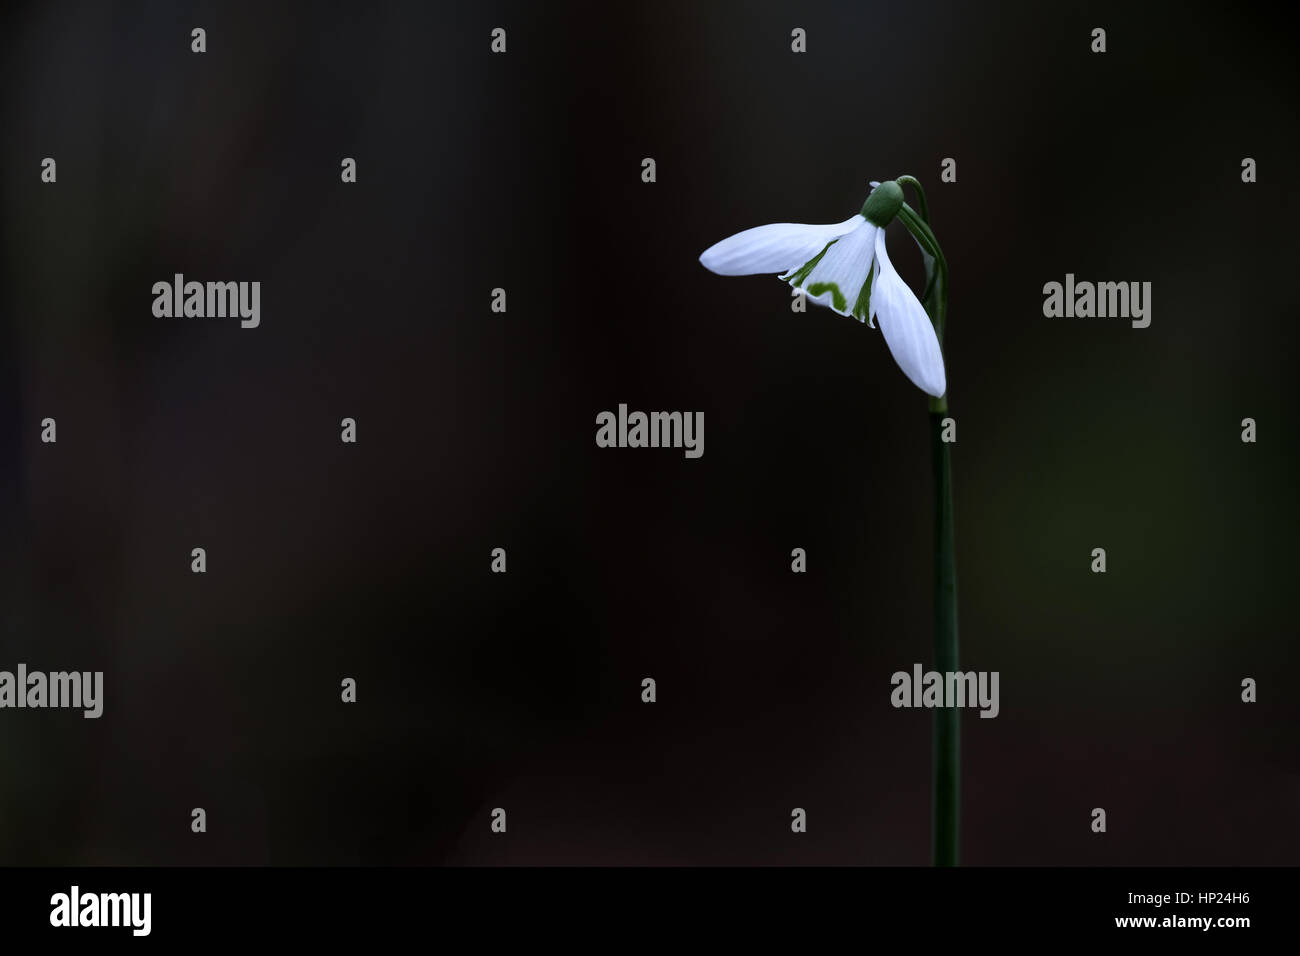 Snowdrops (Galanthus) in full bloom during late winter, early spring, growing in woodland. Stock Photo